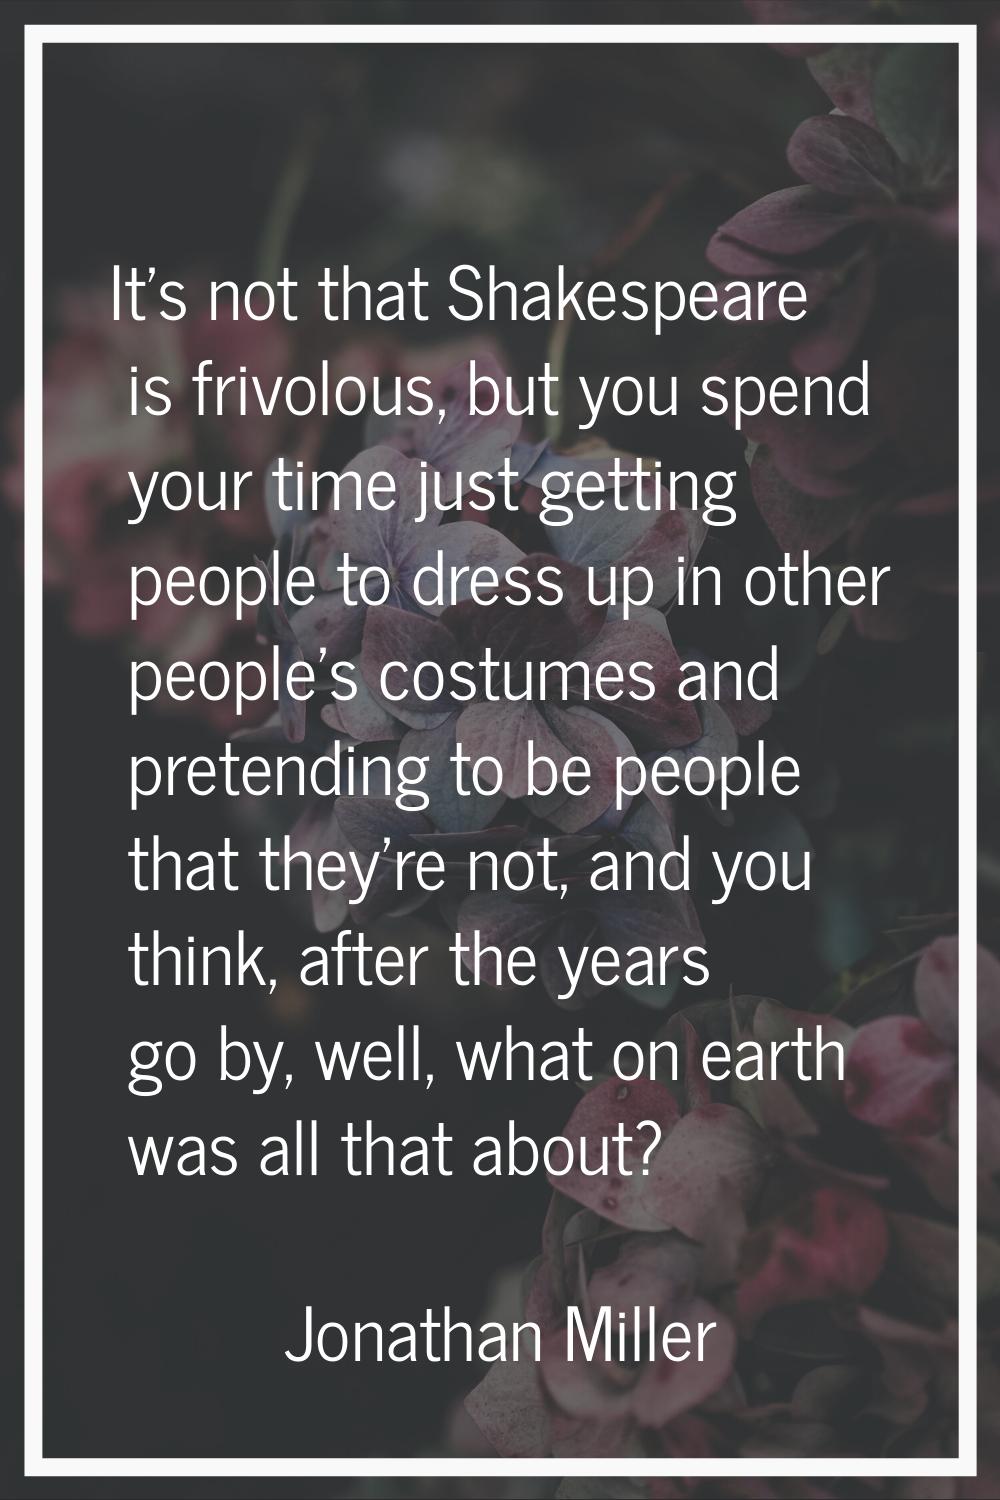 It's not that Shakespeare is frivolous, but you spend your time just getting people to dress up in 